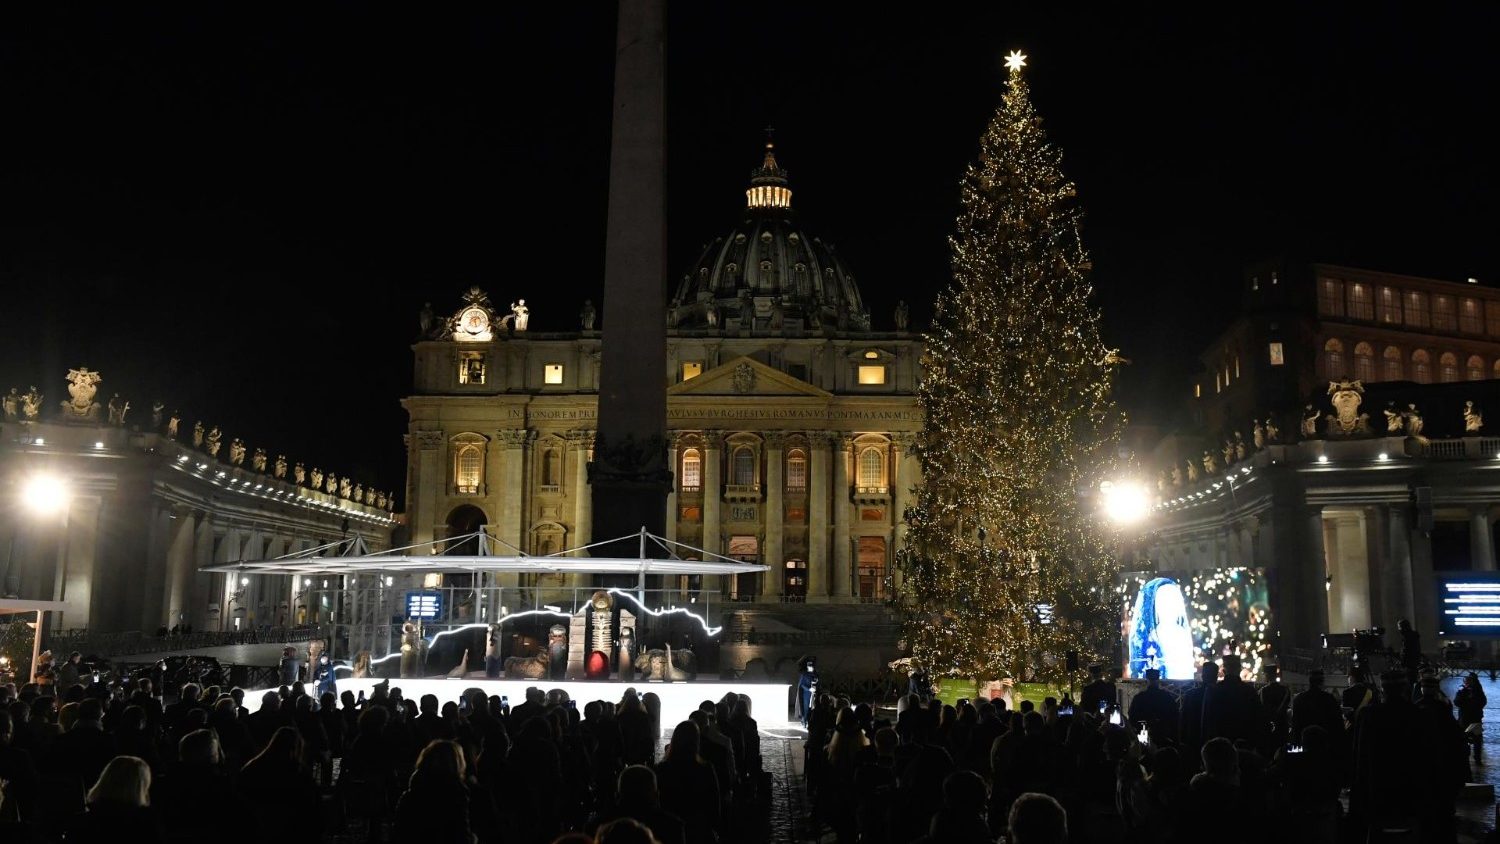 Christmas tree, Nativity scene lit up in St. Peter’s Square Vatican News